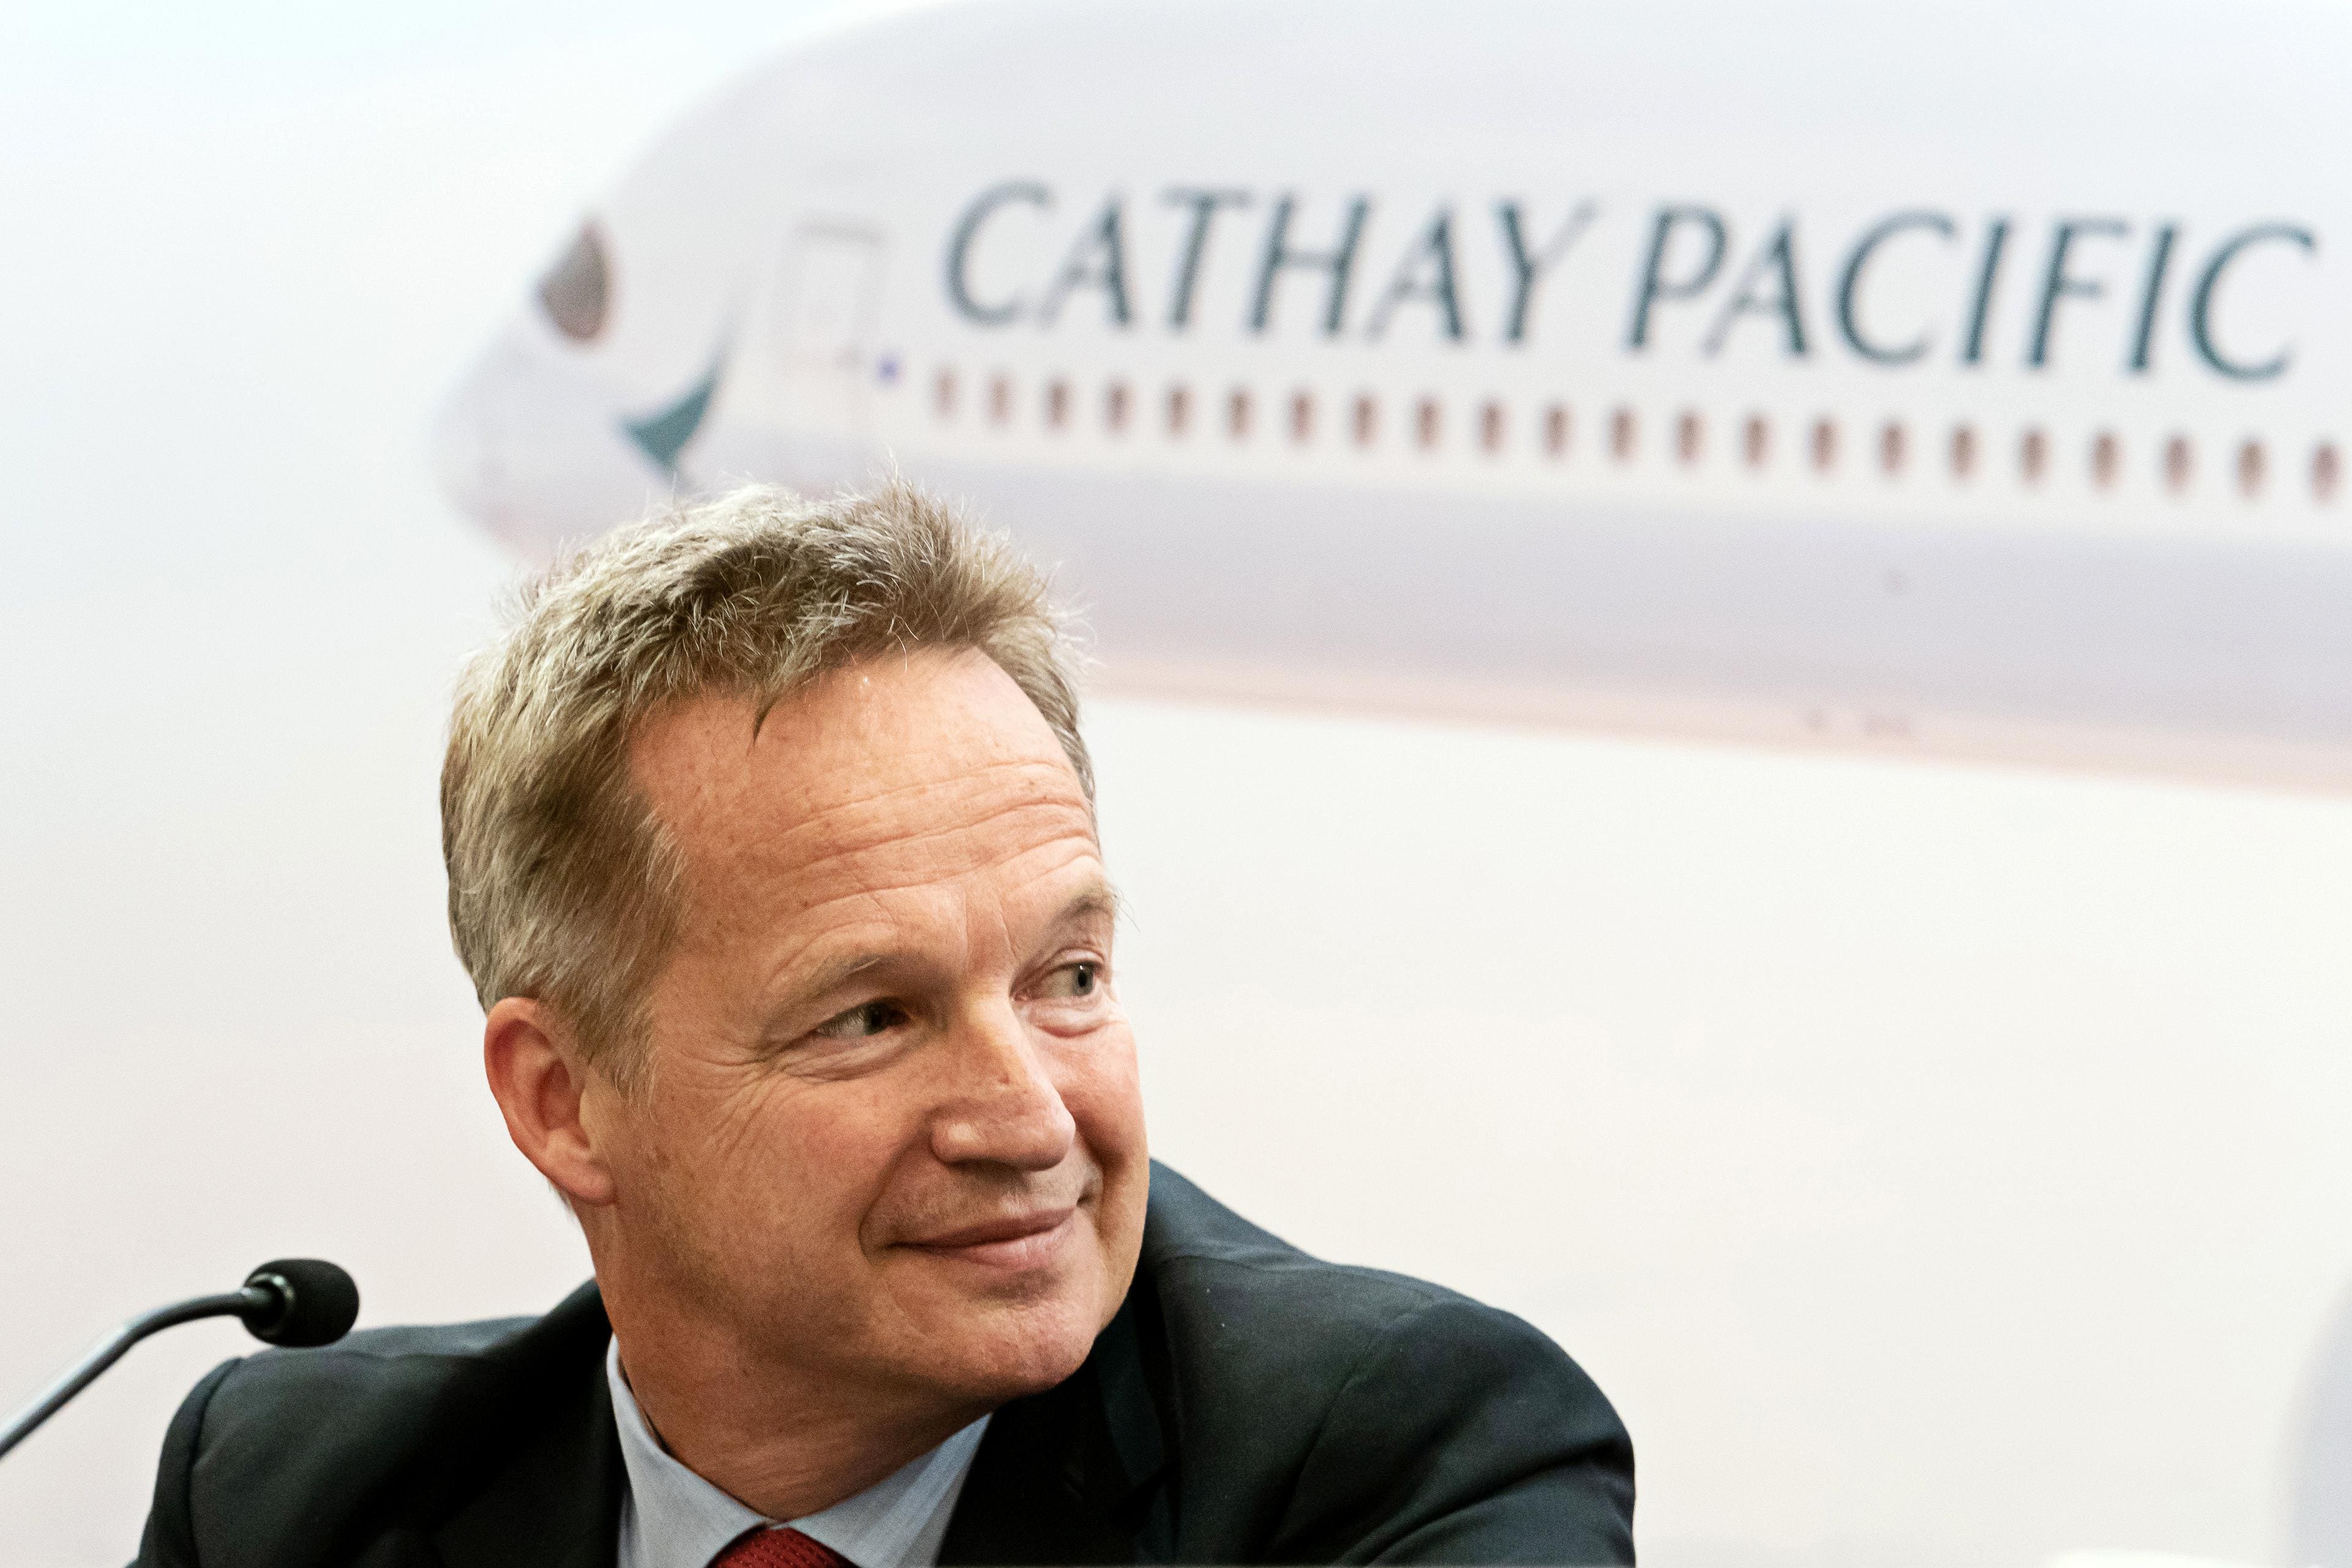 Cathay Pacific Discrimination Scandal Threatens Airline's Reputation